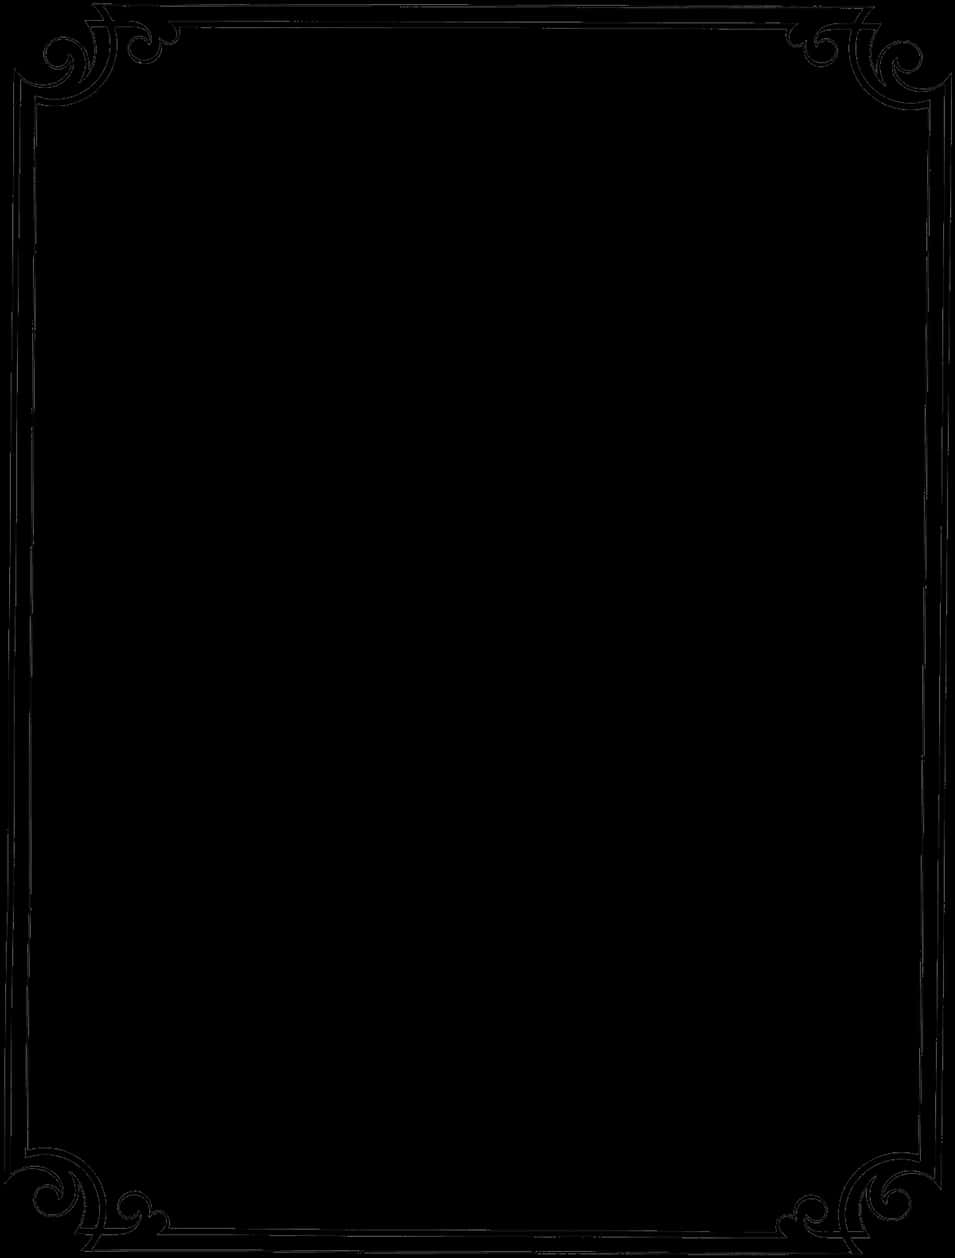 A Black Rectangular Frame With White Lines